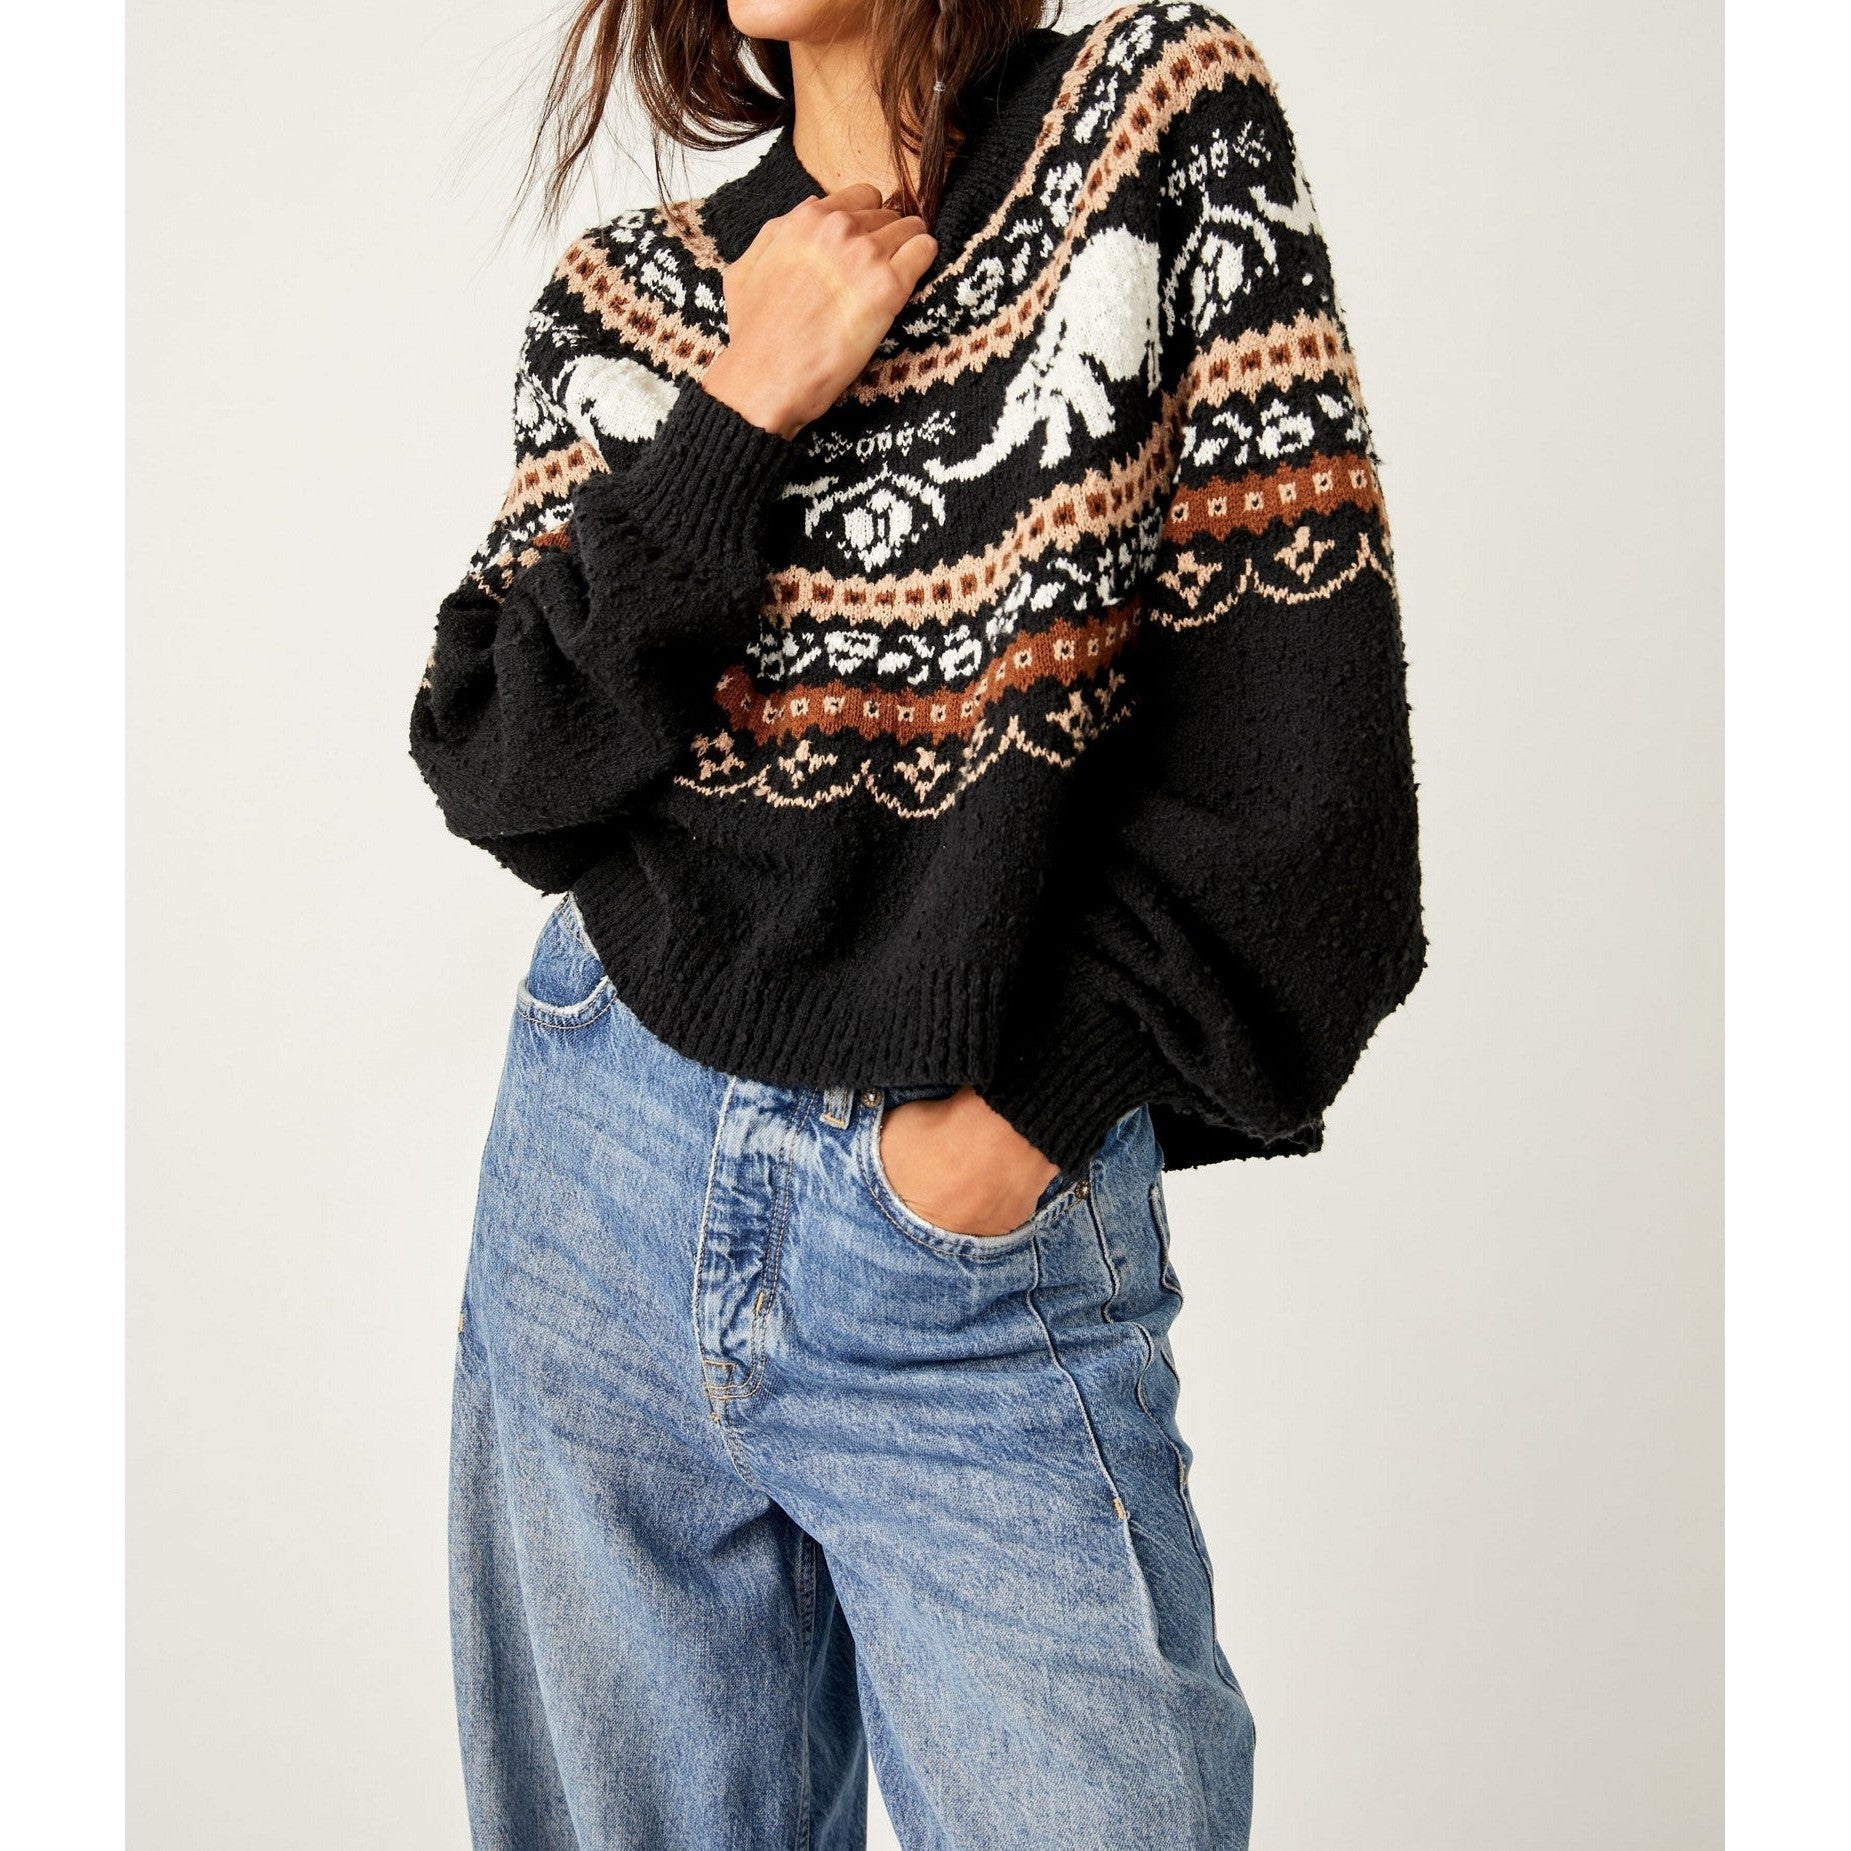 NELLIE SWEATER-Jackets & Sweaters-FREE PEOPLE-XSMALL-ATHRACITE COMBO-Coriander